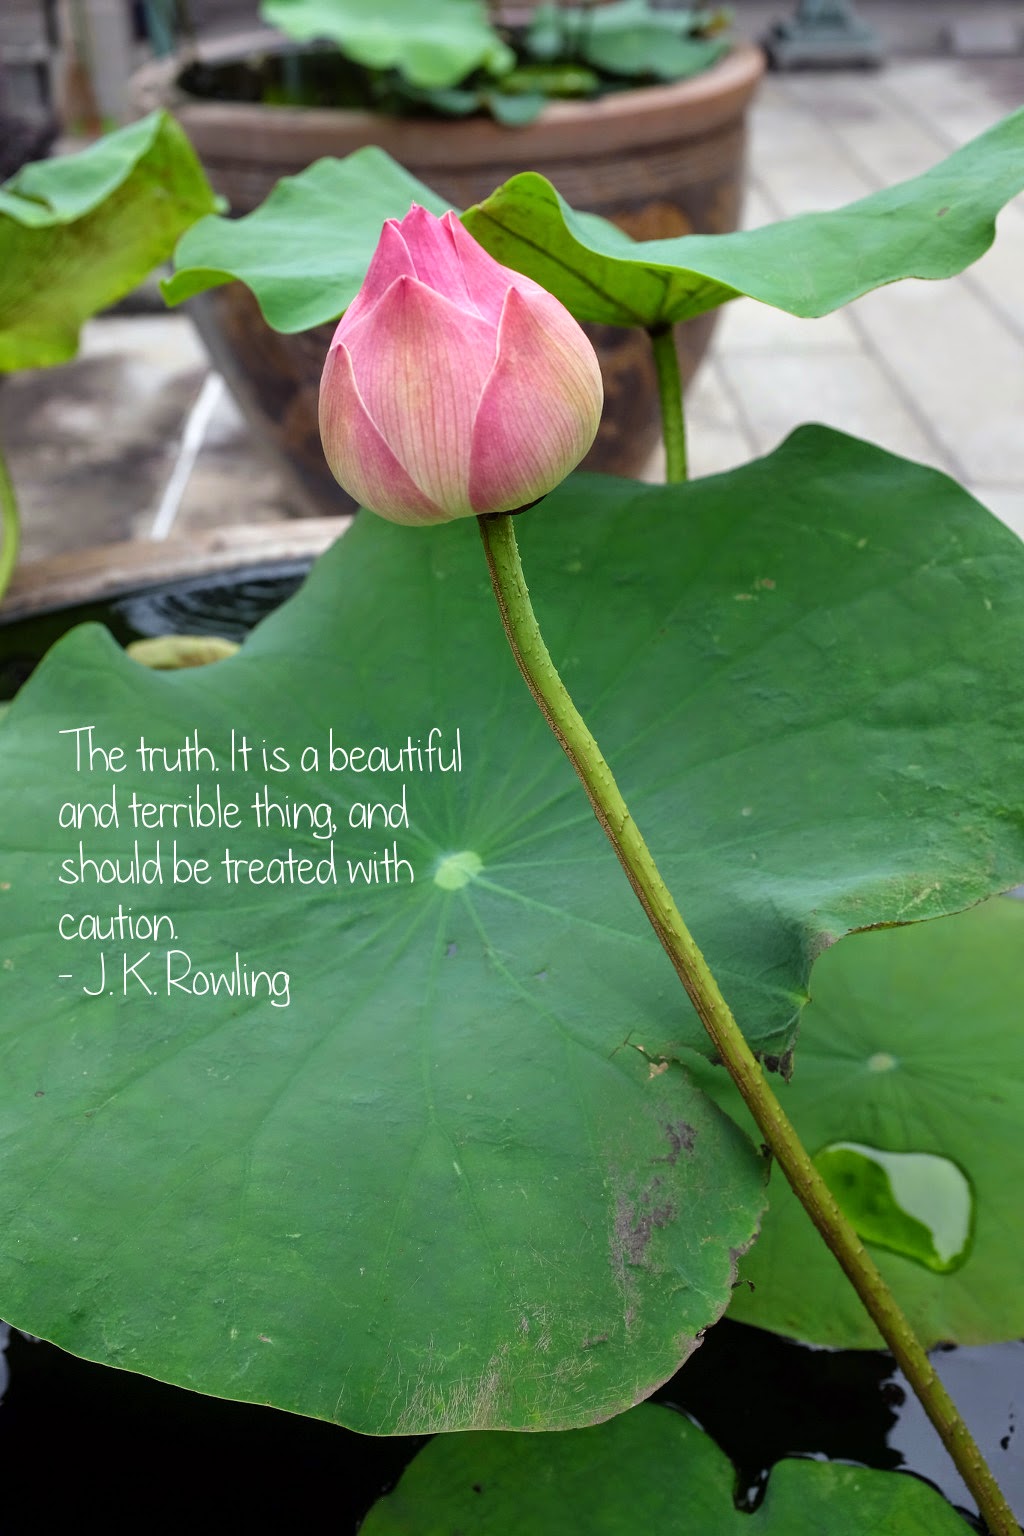 Thoughtsnlife.com : The truth. It is a beautiful and terrible thing, and should be treated with caution. - J. K. Rowling